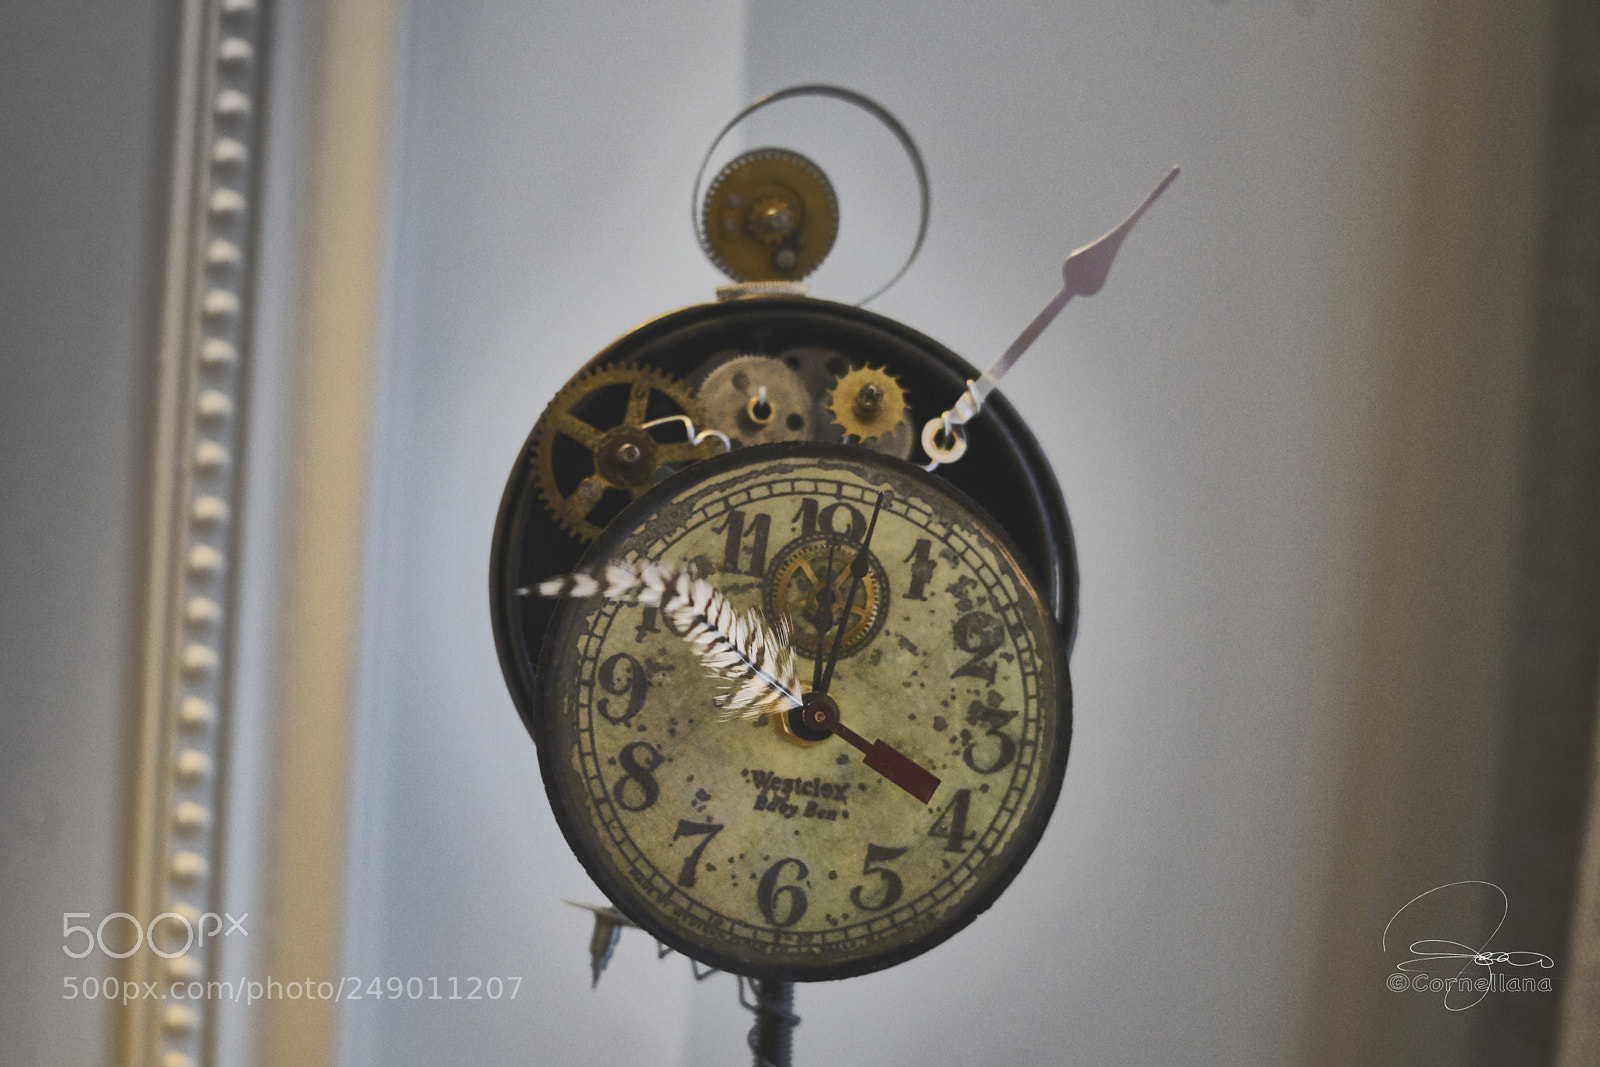 Sony a7R II sample photo. Old clock photography